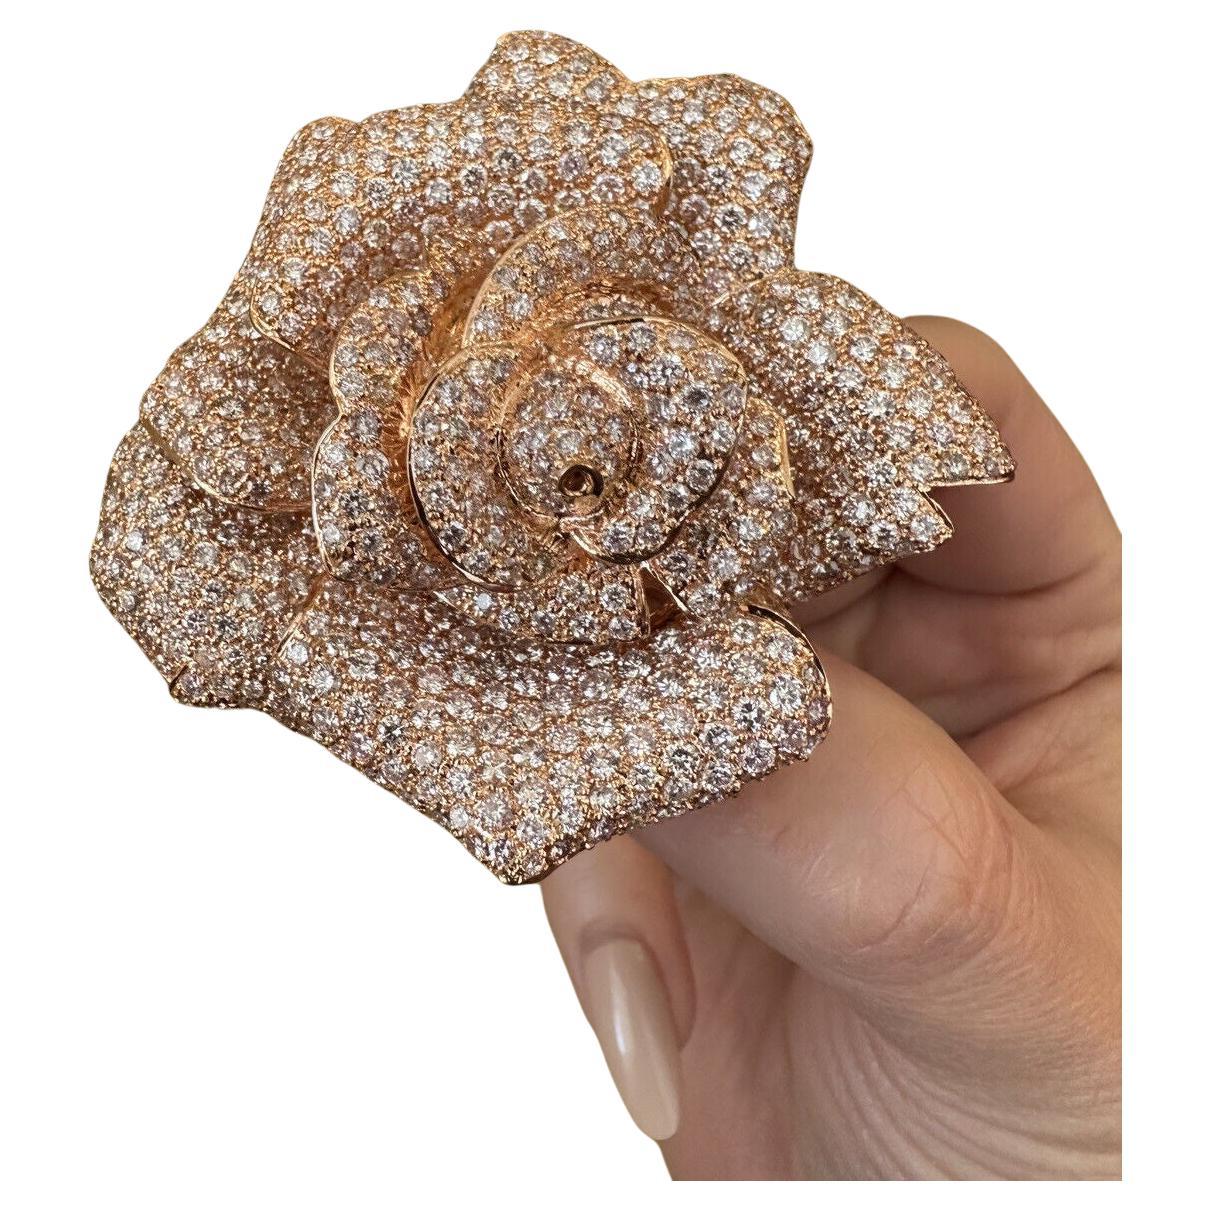 Large Diamond Rose Brooch/Pin/Pendant 22.00 Carat Total Weight in 18k Rose Gold

Large Flower Brooch in 18k Rose Gold features 22.15 carats of Round Brilliant Diamonds pave-set in 18k Rose Gold. The diamonds are bright and lively.

This versatile